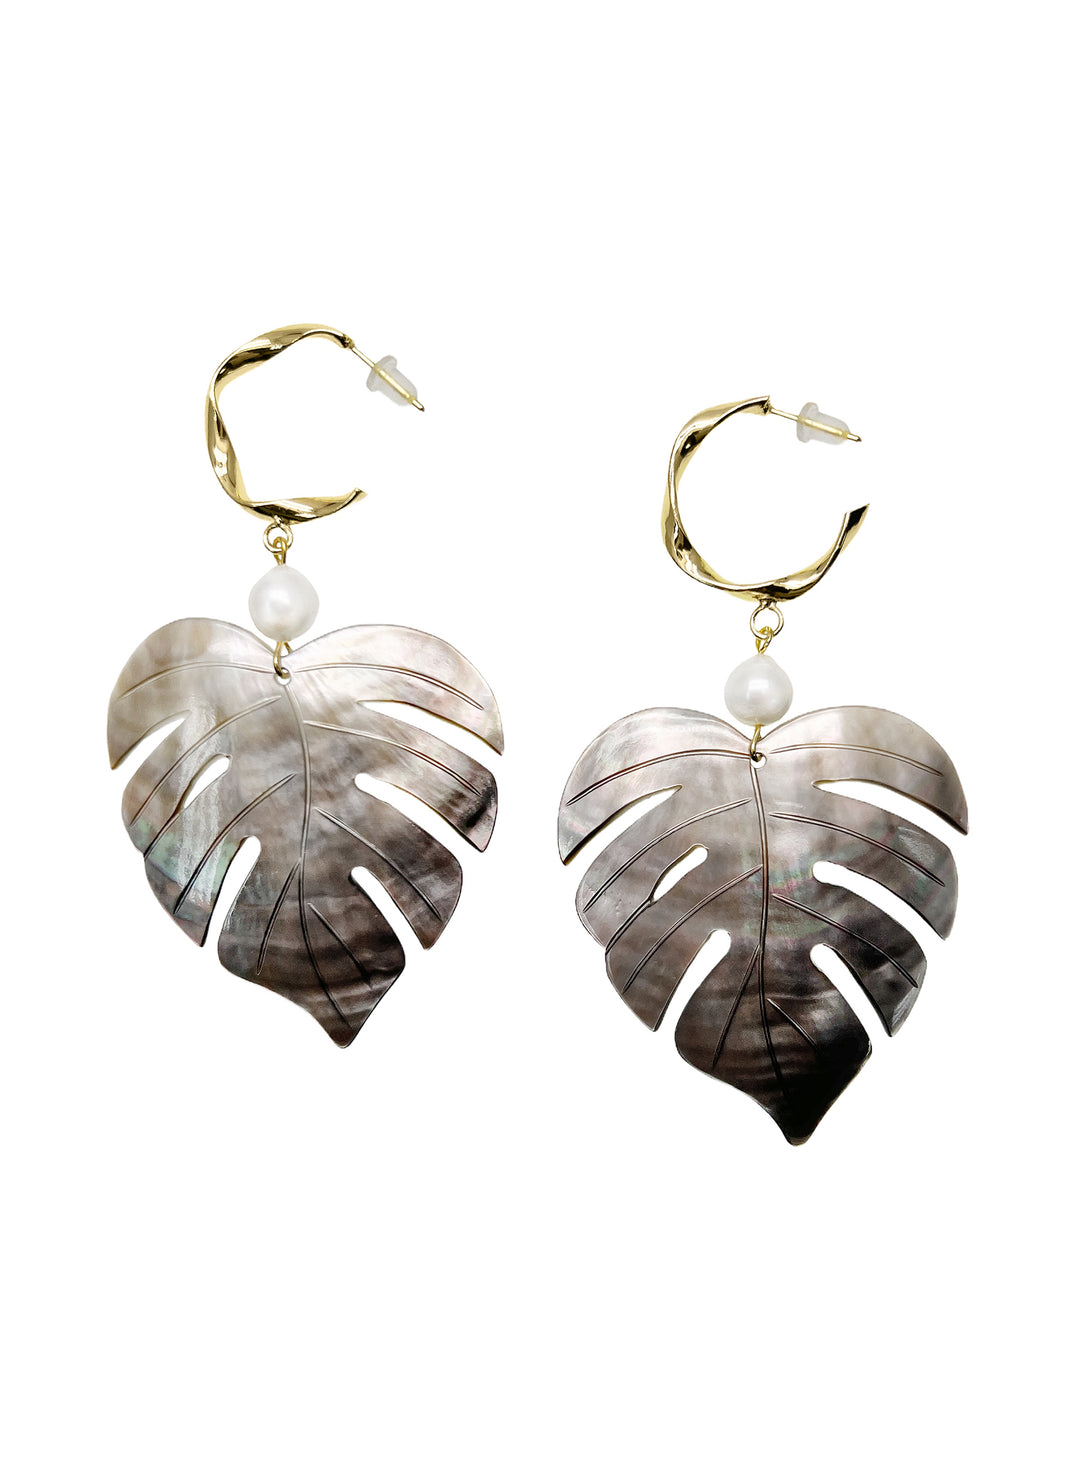 Leaves Shaped Shell With Pearls Hook Earrings LE047 - FARRA